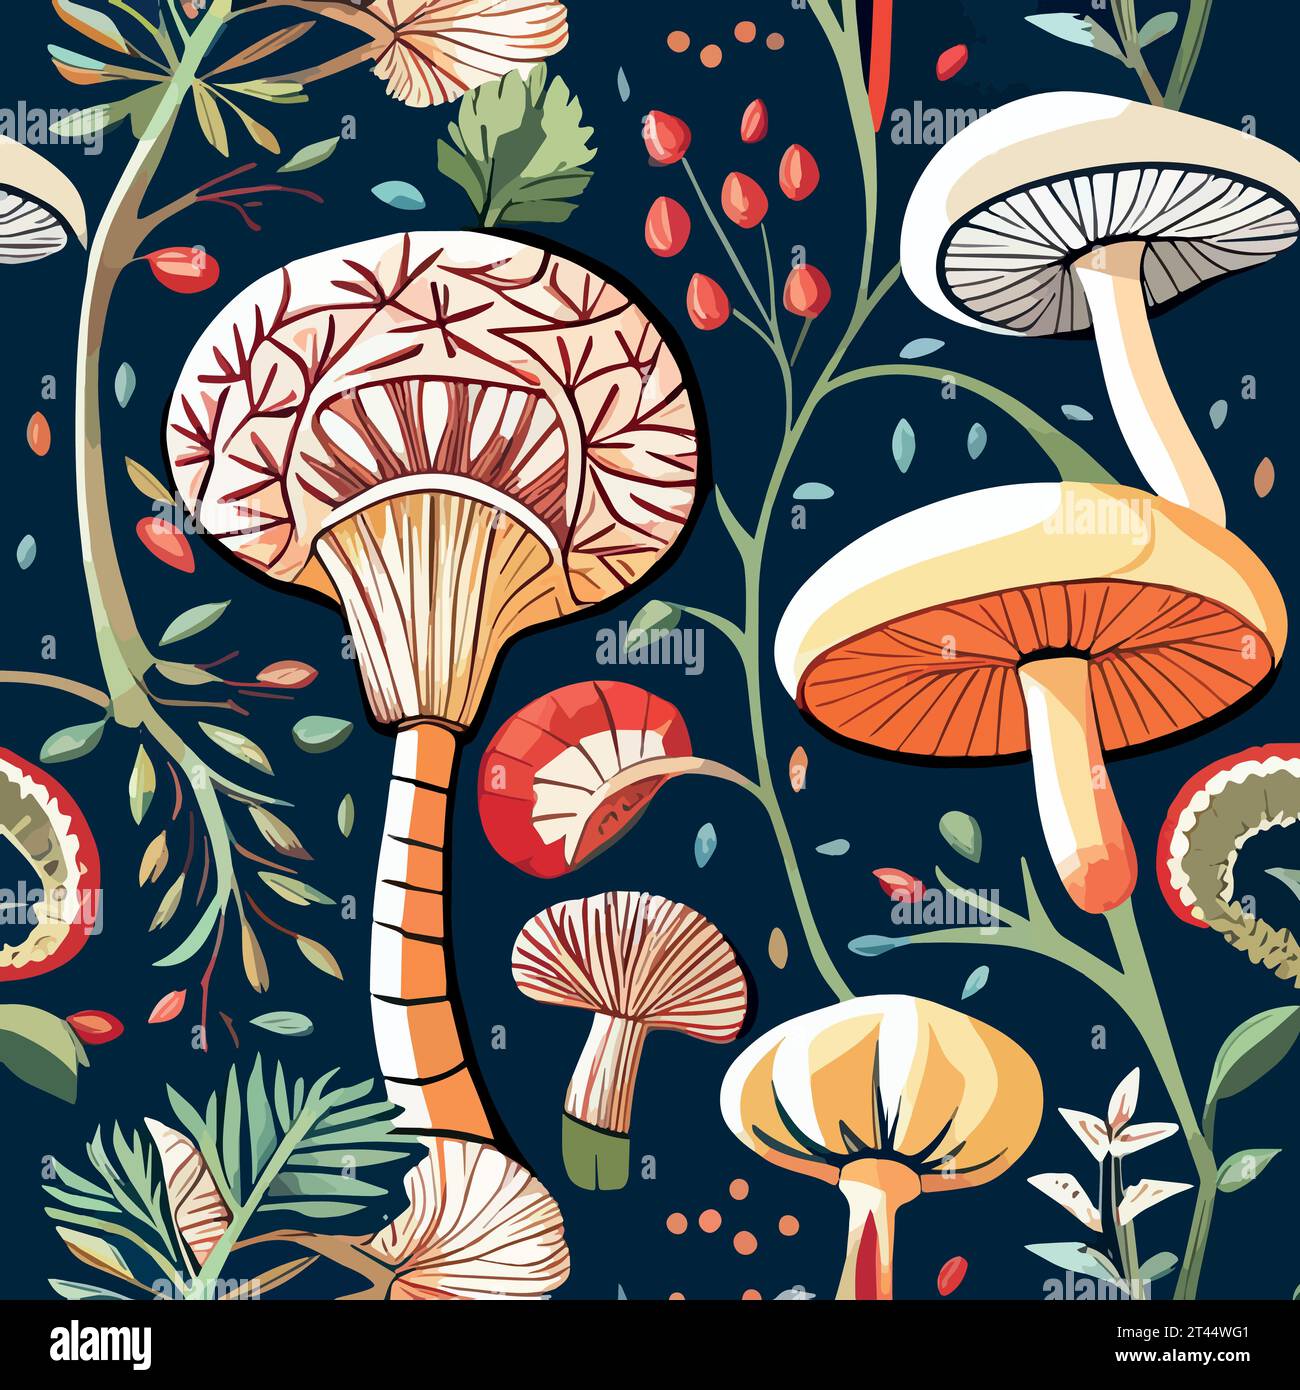 Autumn pattern with mushrooms, berries and leaves Natural trendy print vector illustration. Vector illustration Stock Vector